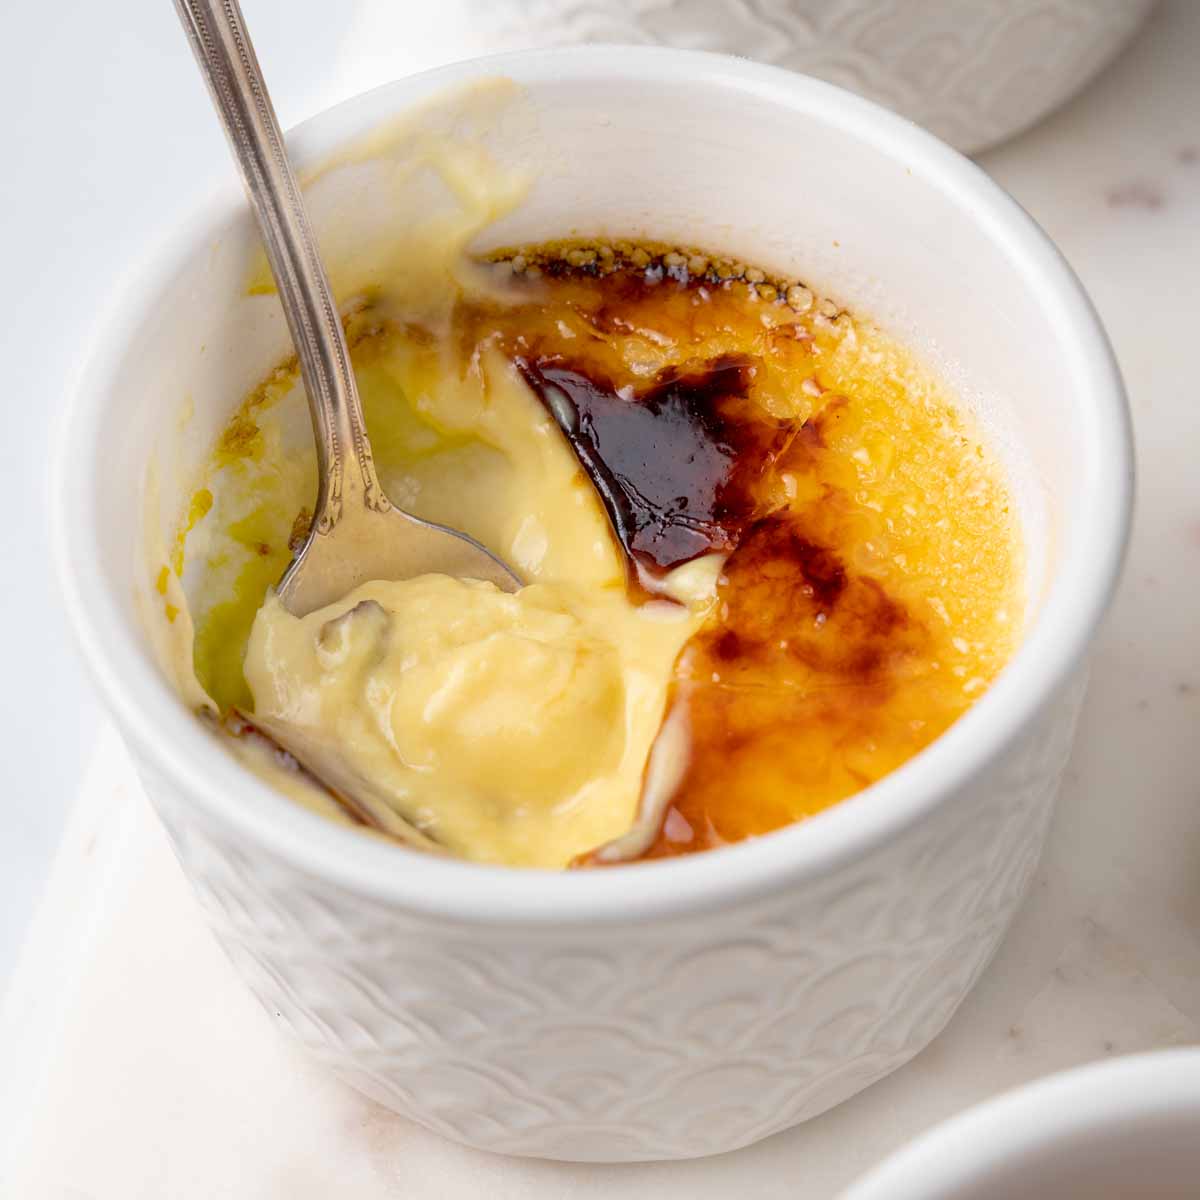 close up of spoon dipped into the creme brulee in the white ramkin